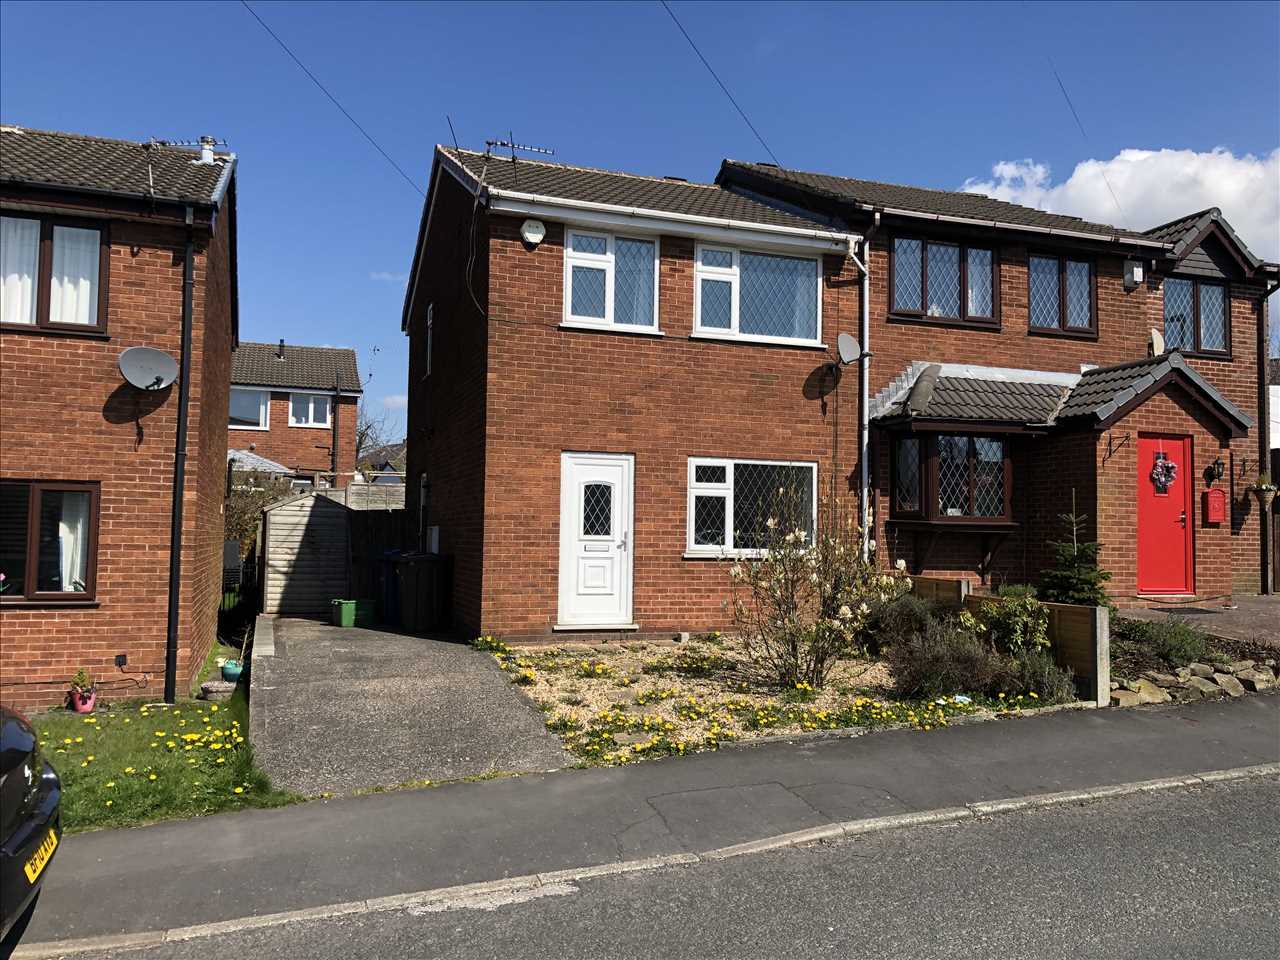 2 bed semi-detached for sale in Rawlinson Lane, Heath Charnock - Property Image 1